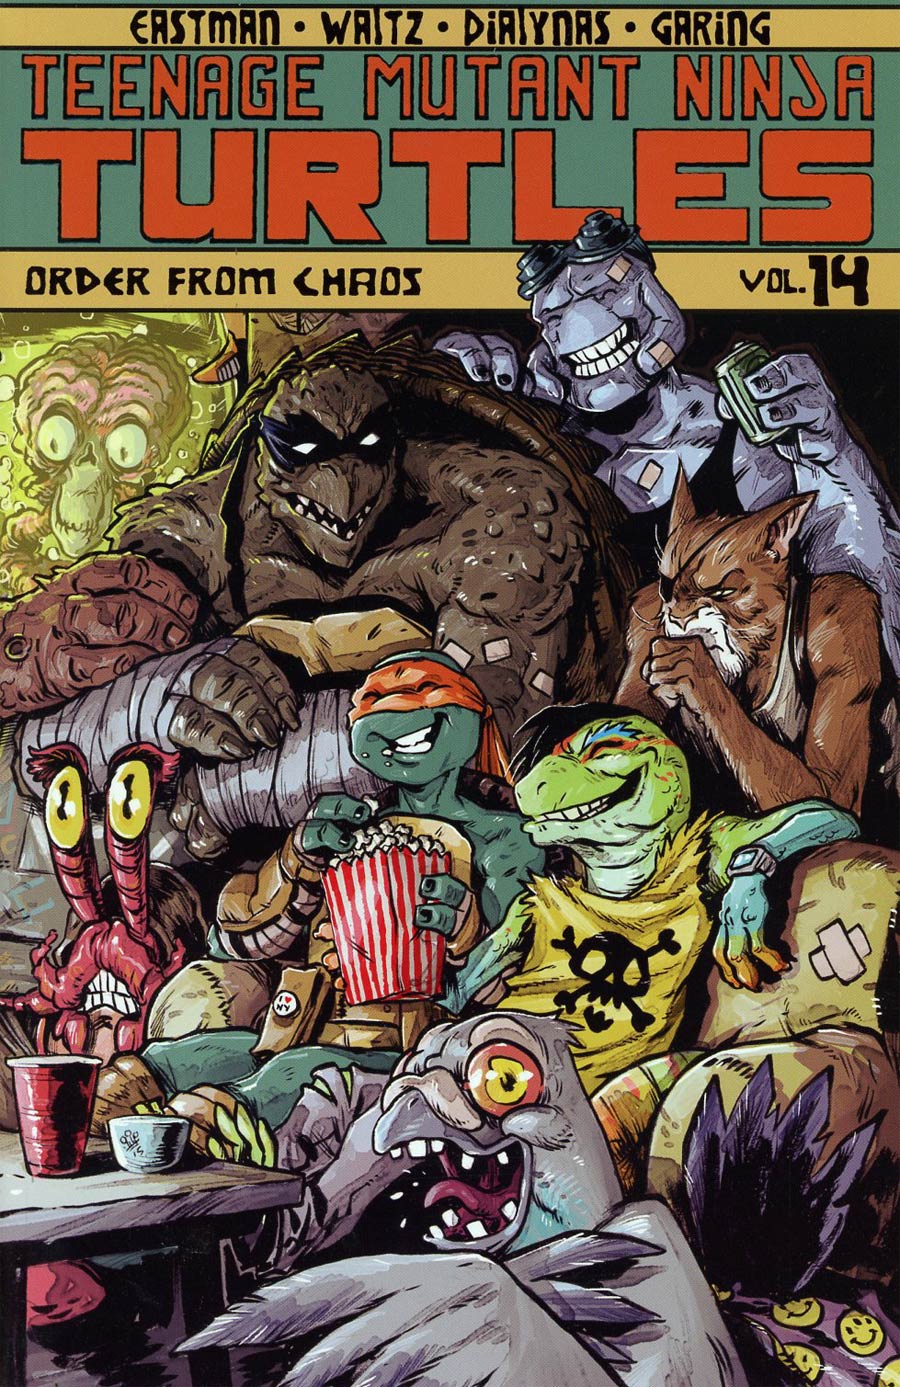 Teenage Mutant Ninja Turtles Ongoing Vol 14 Order From Chaos TP